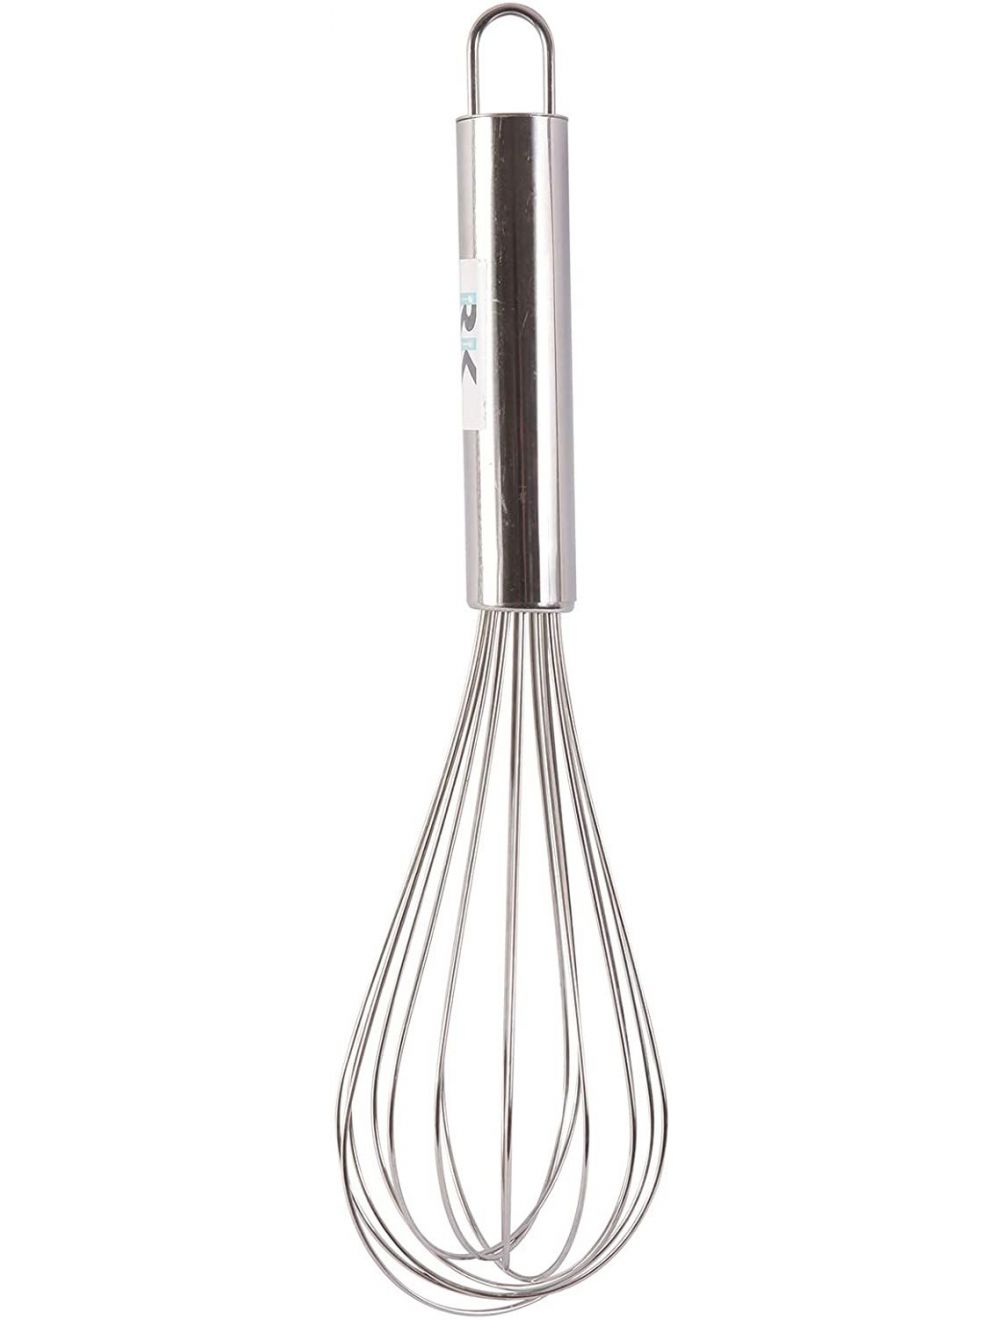 RK Steel Tube Whisk, 12 inches-RK0053